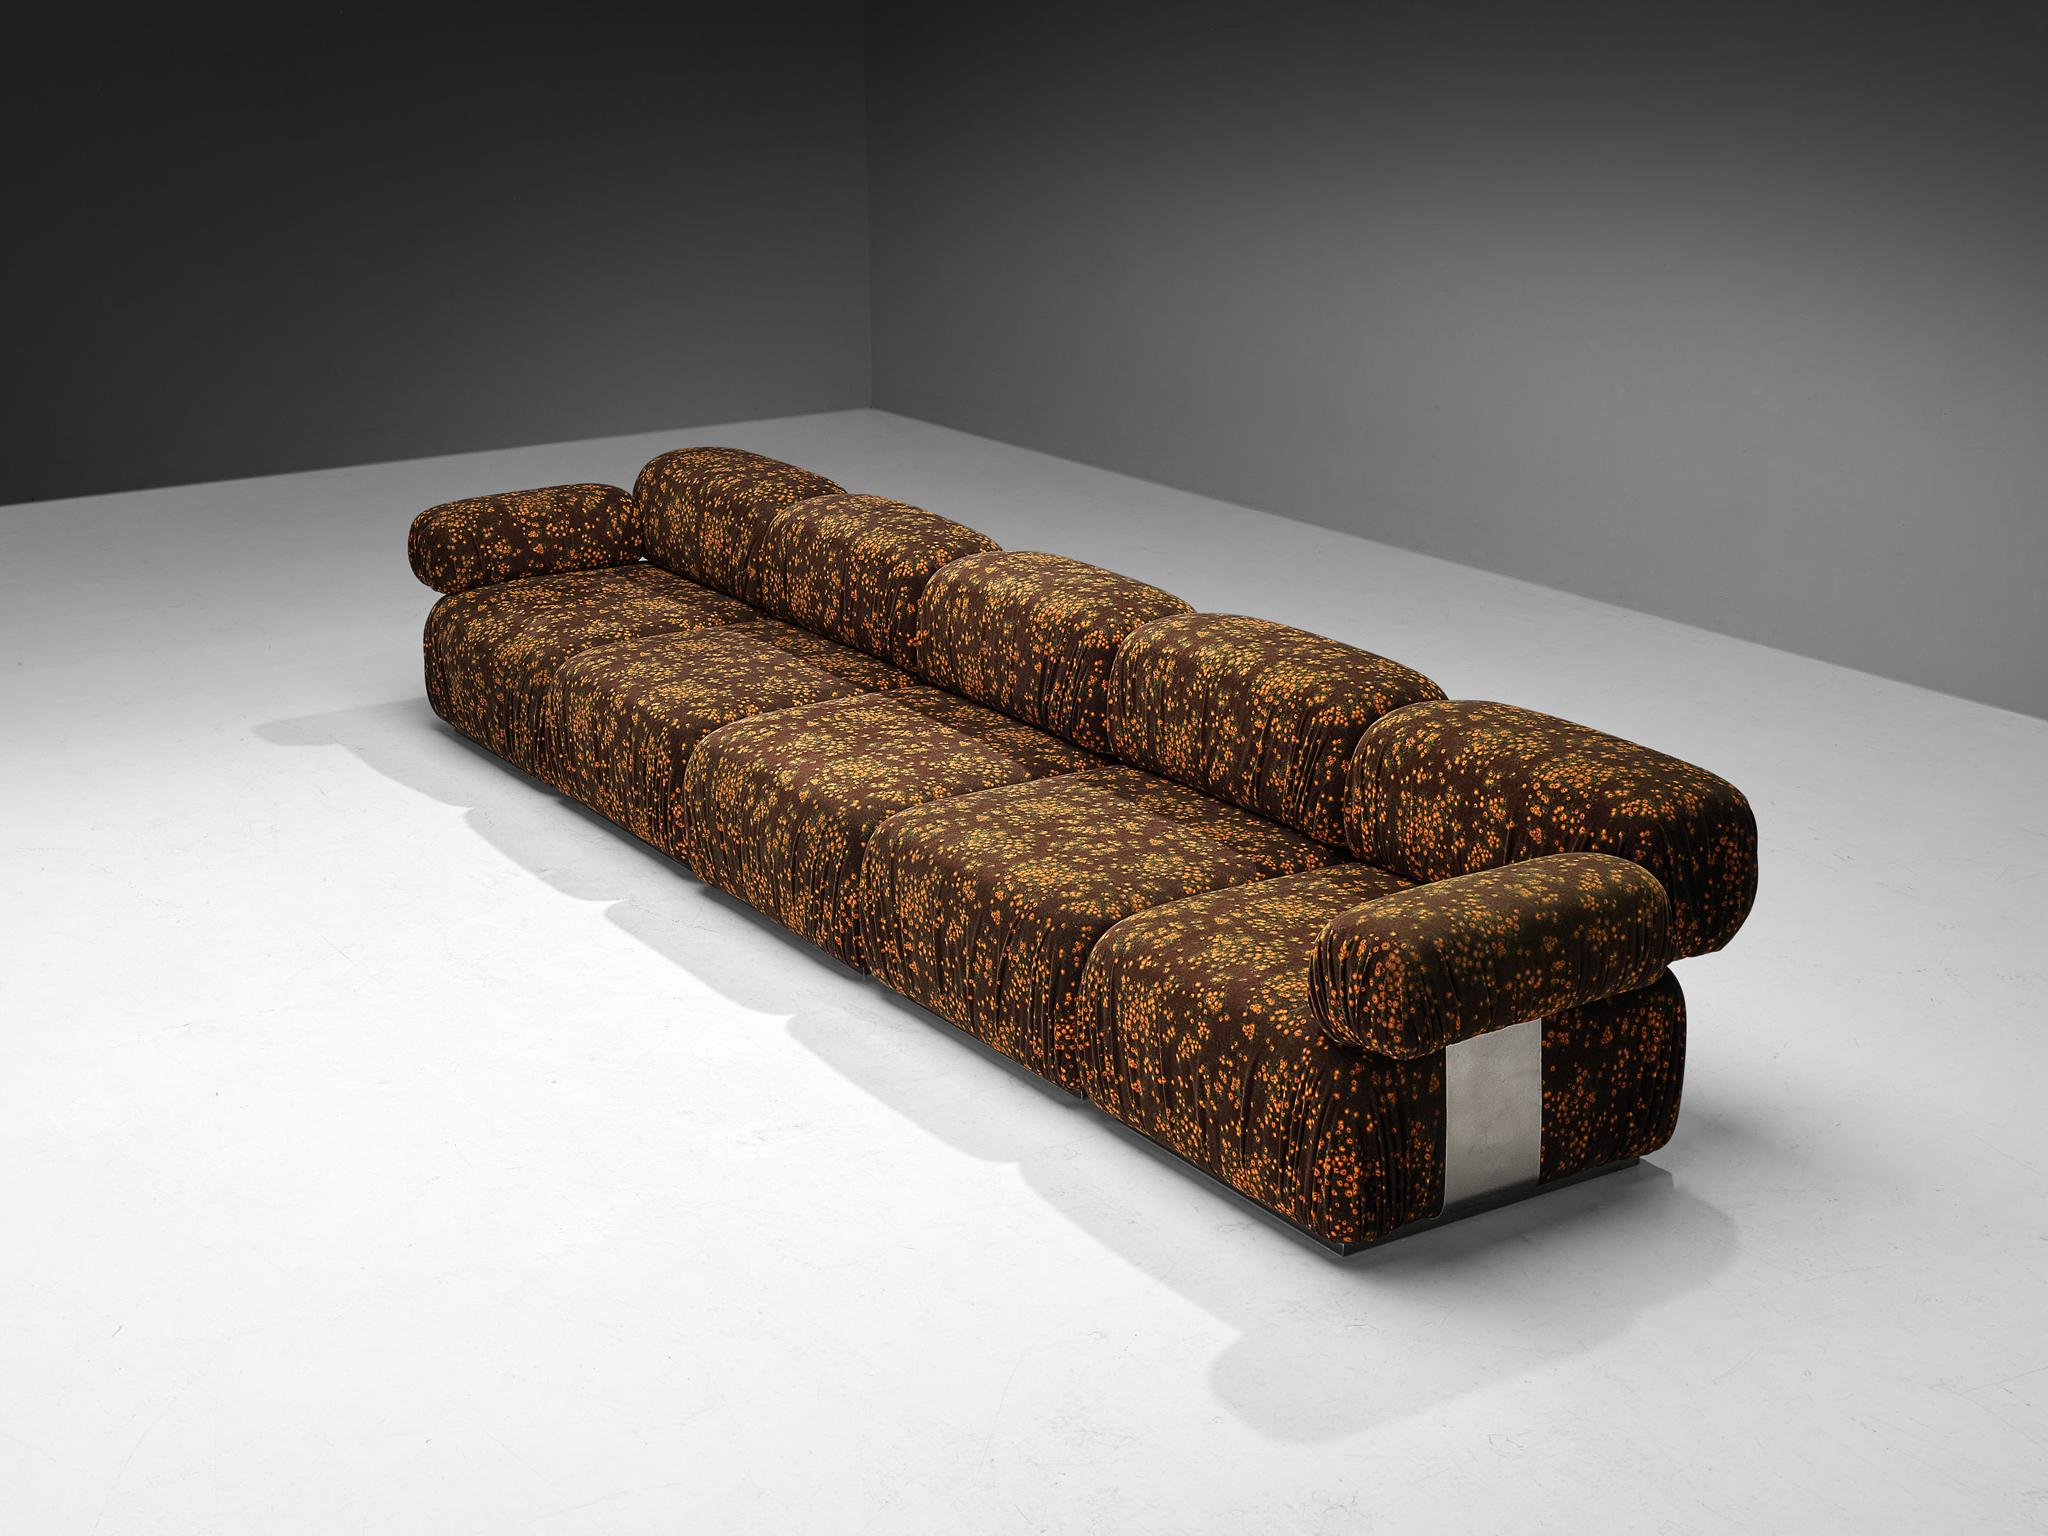 Roberto Iera for Felicerossi, sectional sofa model 'Il Colombaccio', fabric, stainless steel, Italy, 1970s

Stunnig modular sofa by Italian designer Roberto Iera for manufacturer Felicerossi. The 'Il Colombaccio', meaning wood pigeon in Italian,